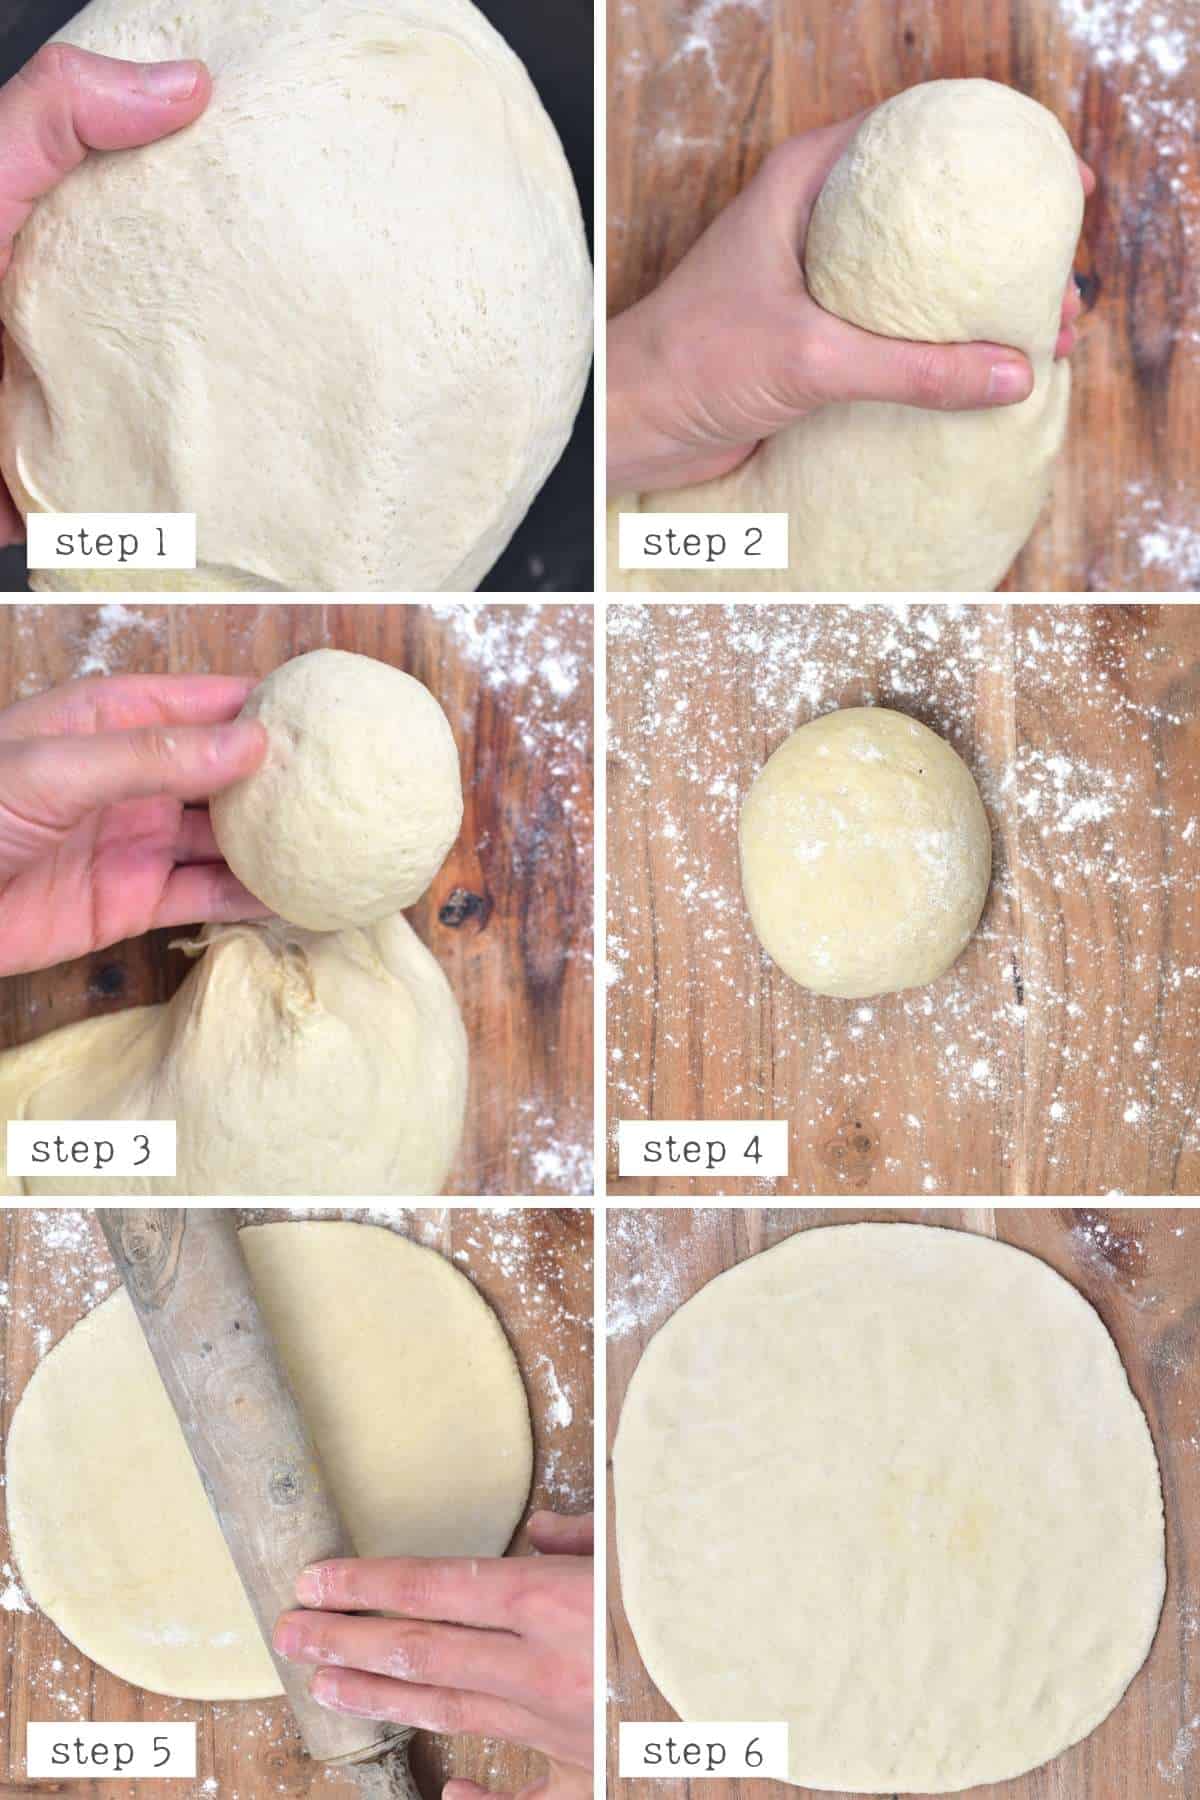 Steps for rolling manakish dough